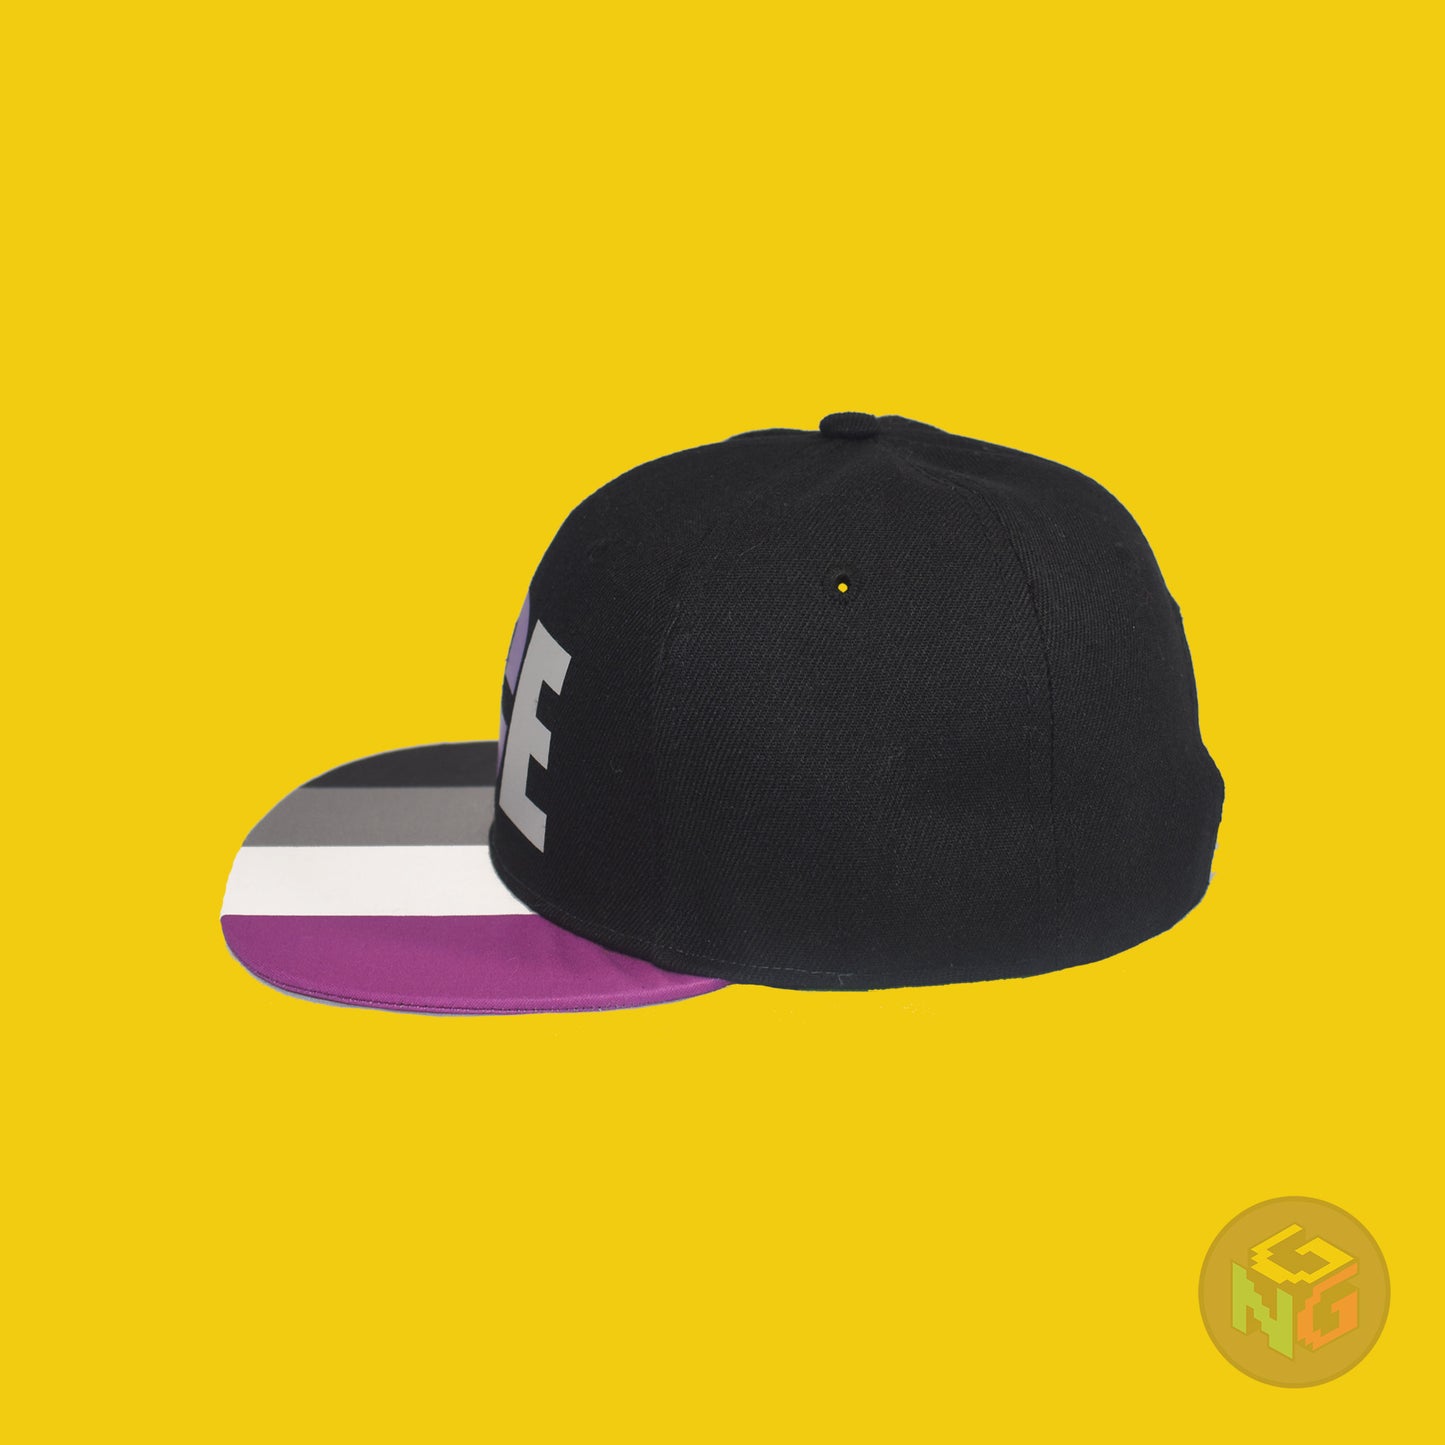 Black flat bill snapback hat. The brim has the asexual pride flag on both sides and the front of the hat has the word “ACE” in white, purple, and grey. Left view